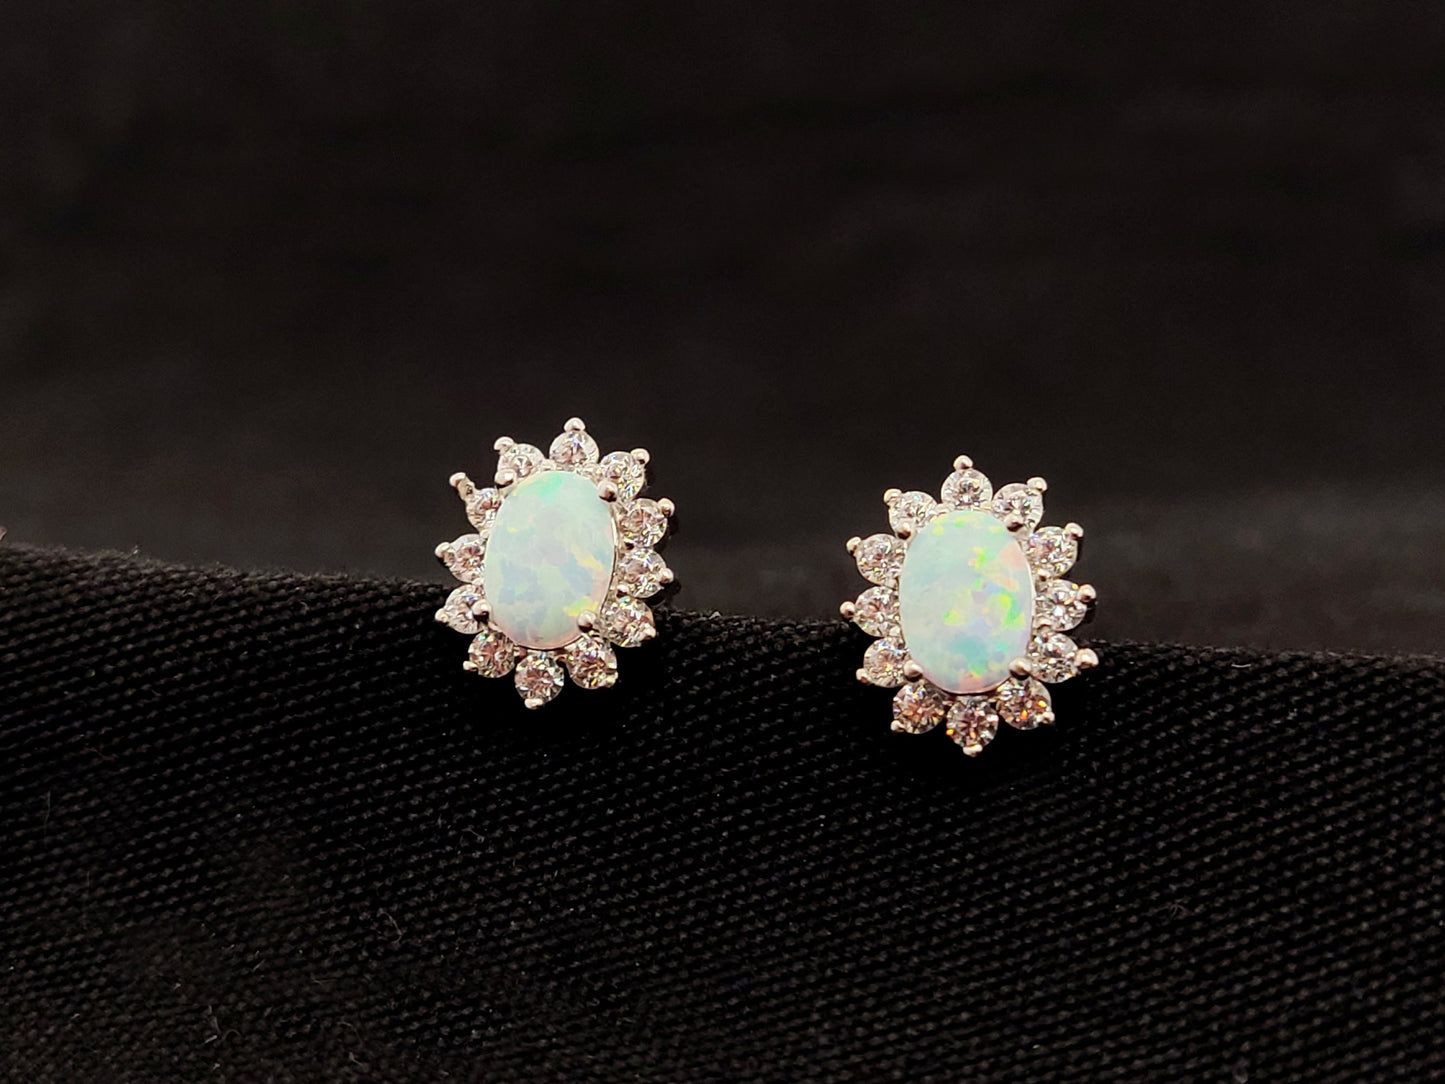 Sterling Silver 925 Oval Rosetta White Opal Small Stud Earrings 9x10mm, Opal Crystals Earrings, Griechisches Silber Ohrringe  Bijoux Grecque